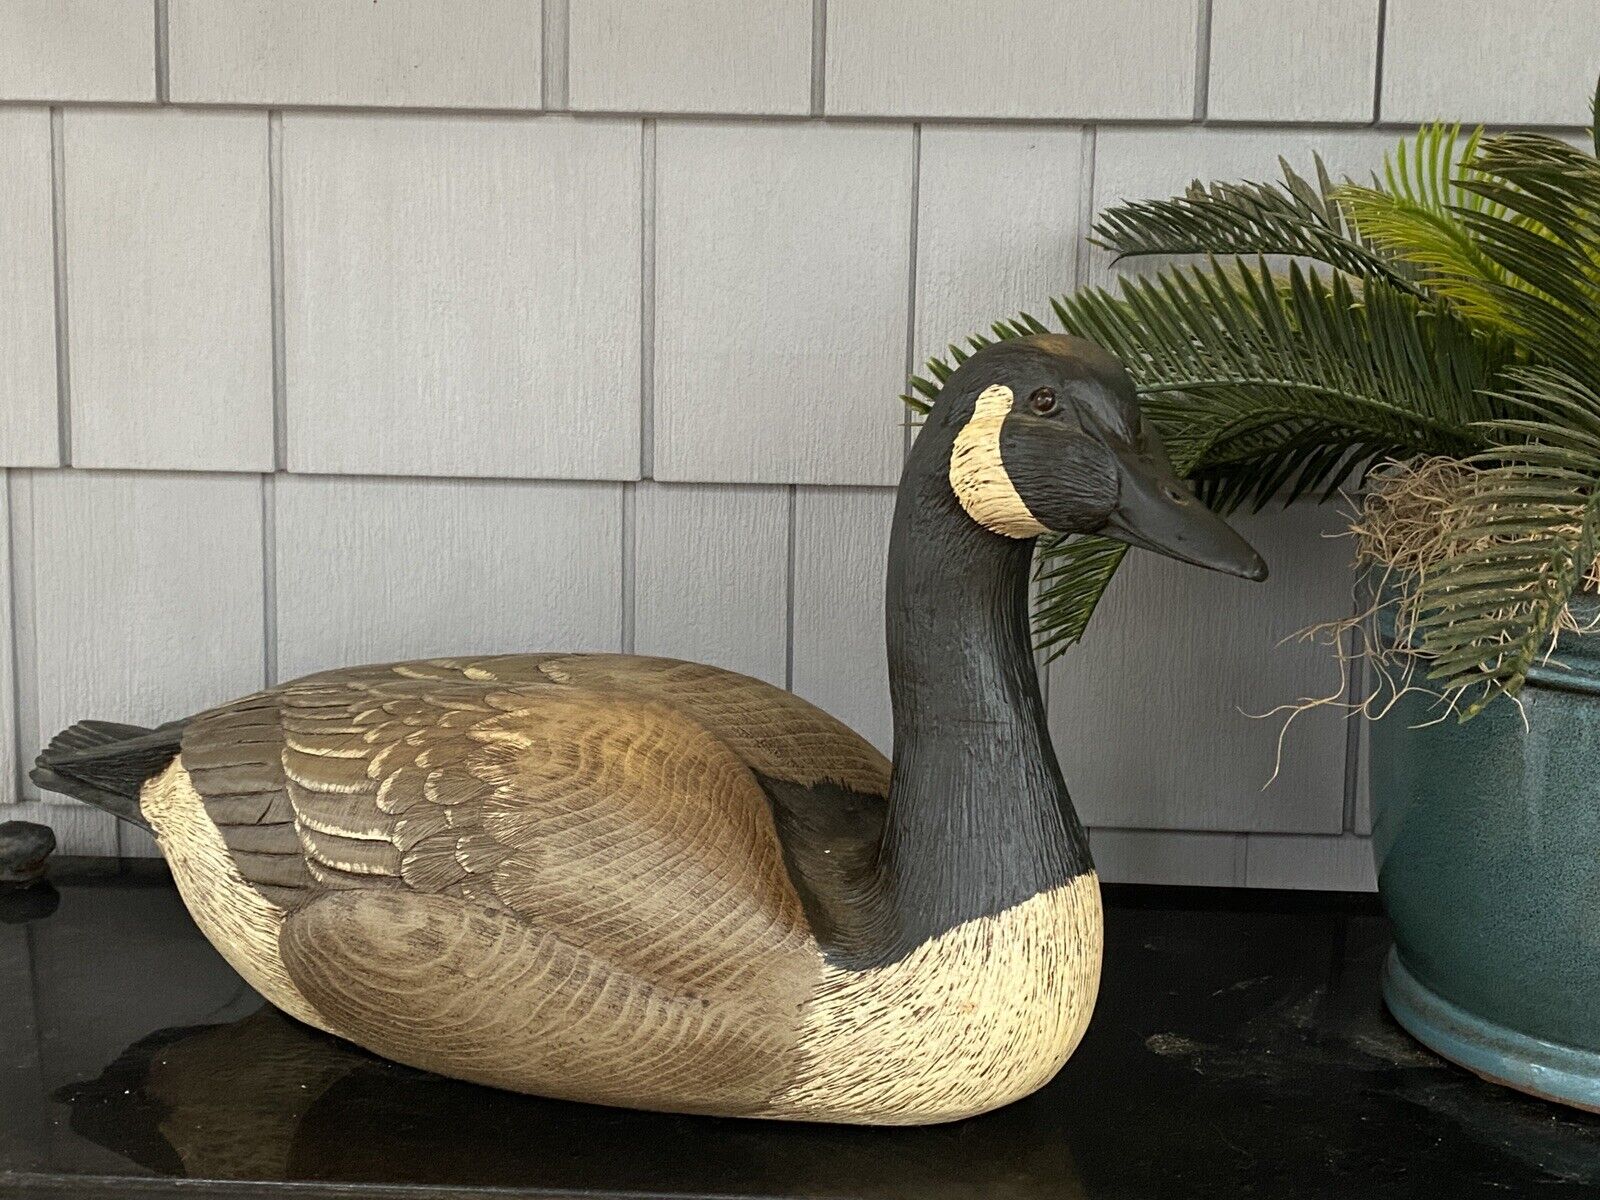 Immaculate 1983 Vintage hand-painted life size Canadian Goose, signed Fouts